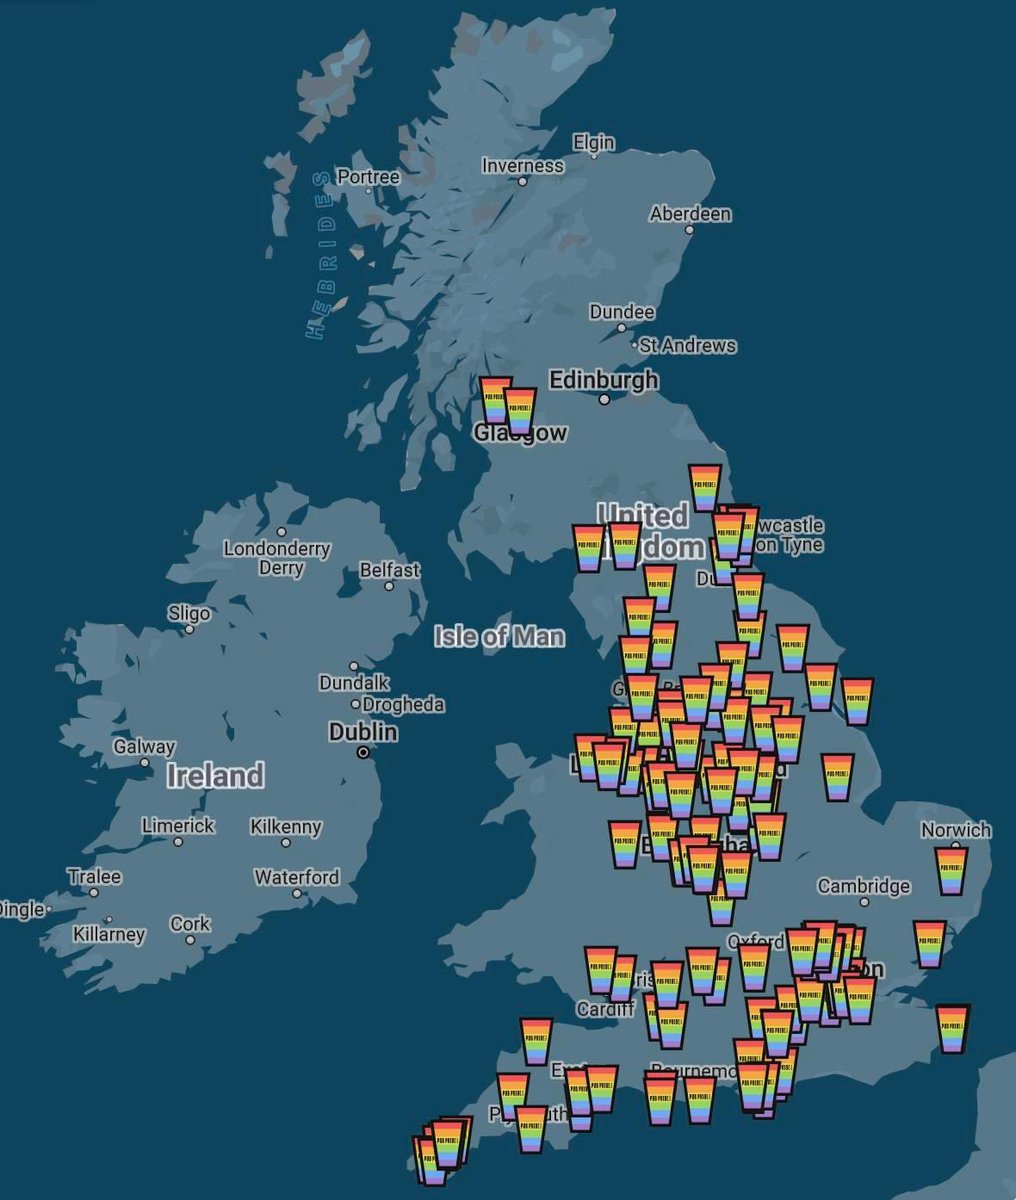 Pub Pride 24 - Mapped! Is your local on there? google.com/maps/d/u/0/edi…